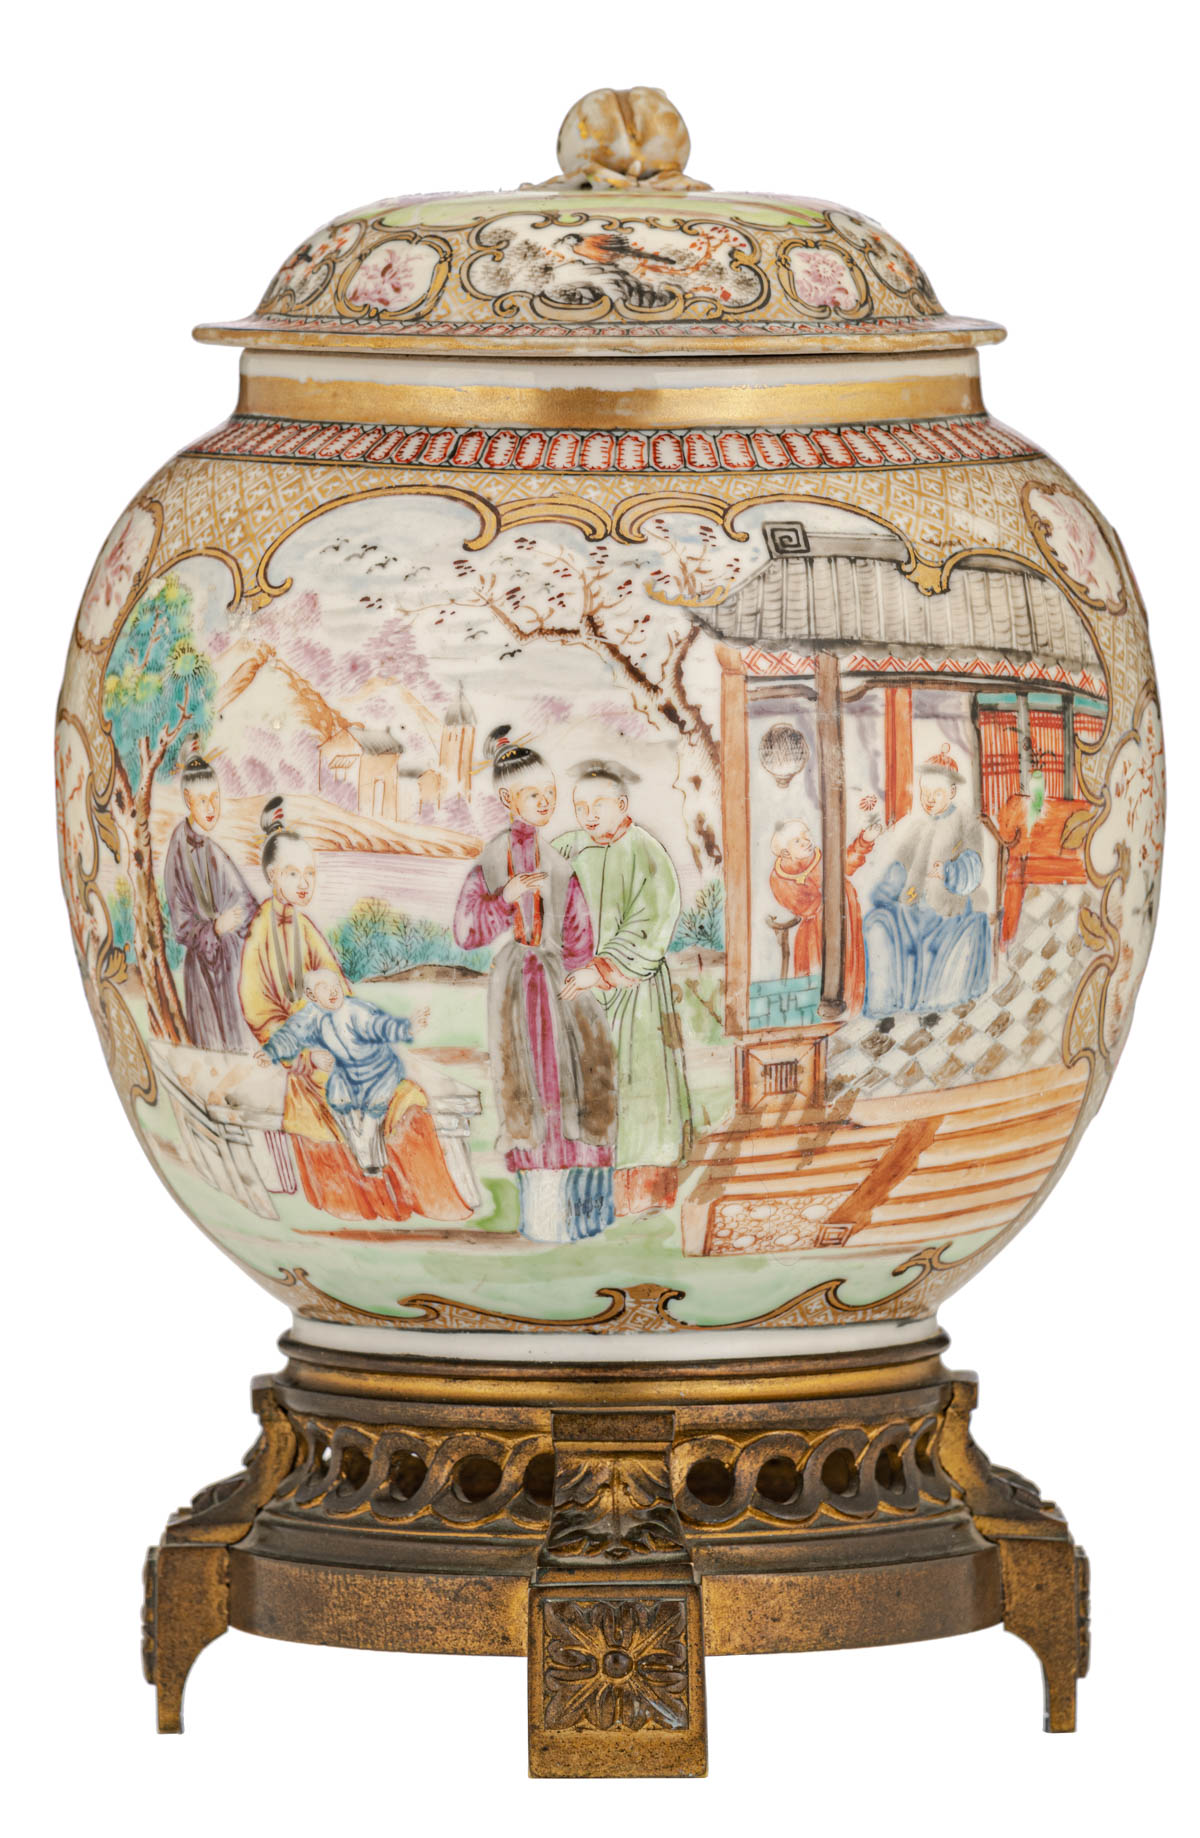 A Chinese export porcelain ginger jar in the so-called 'Rockefeller pattern'